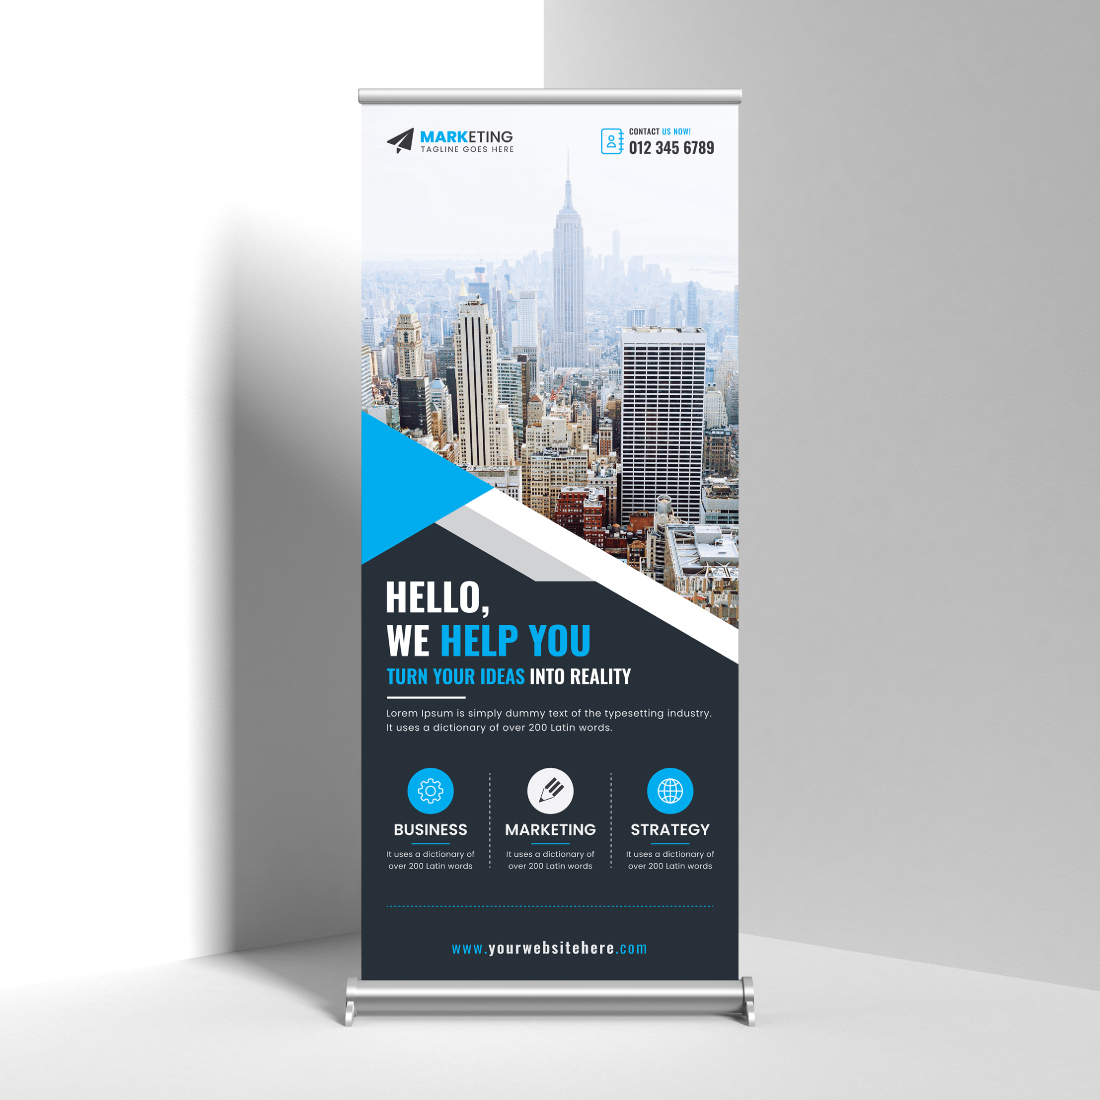 Image of corporate roll up banner in colorful blue design